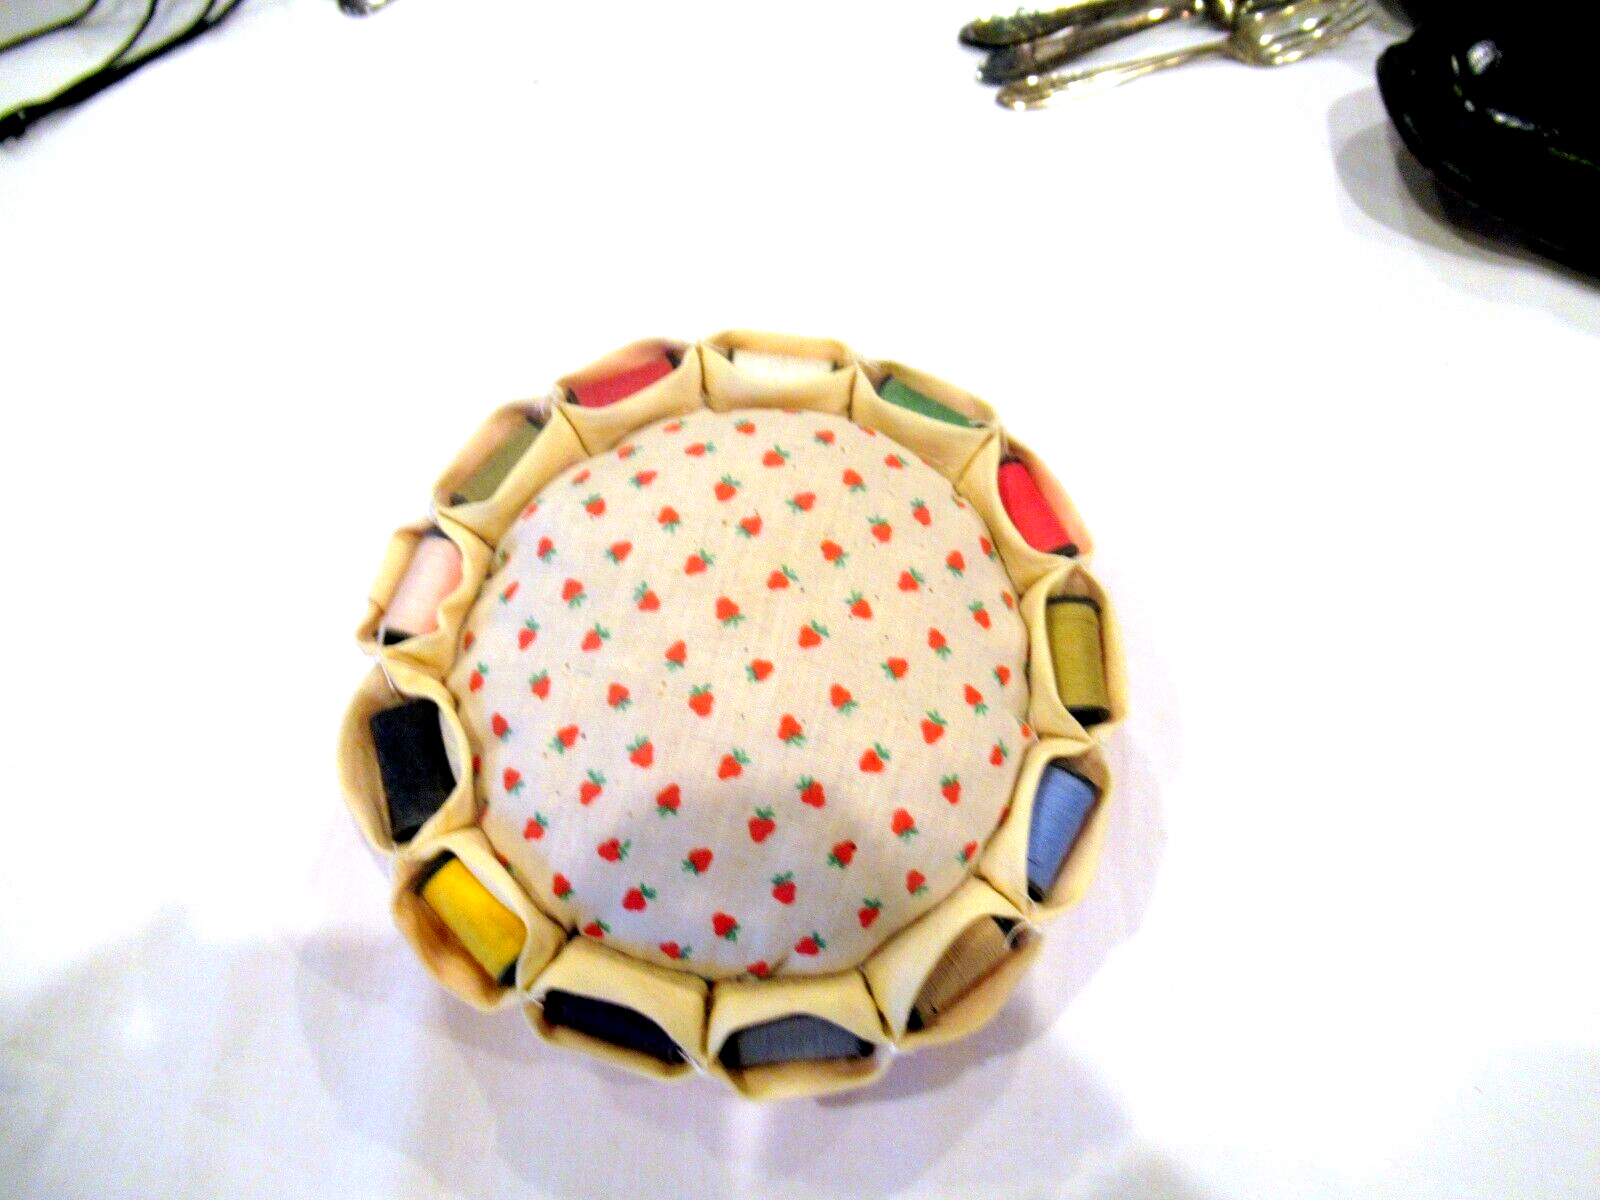 Strawberry pincushion surrounded by 13 spools of thread, c. 1960s